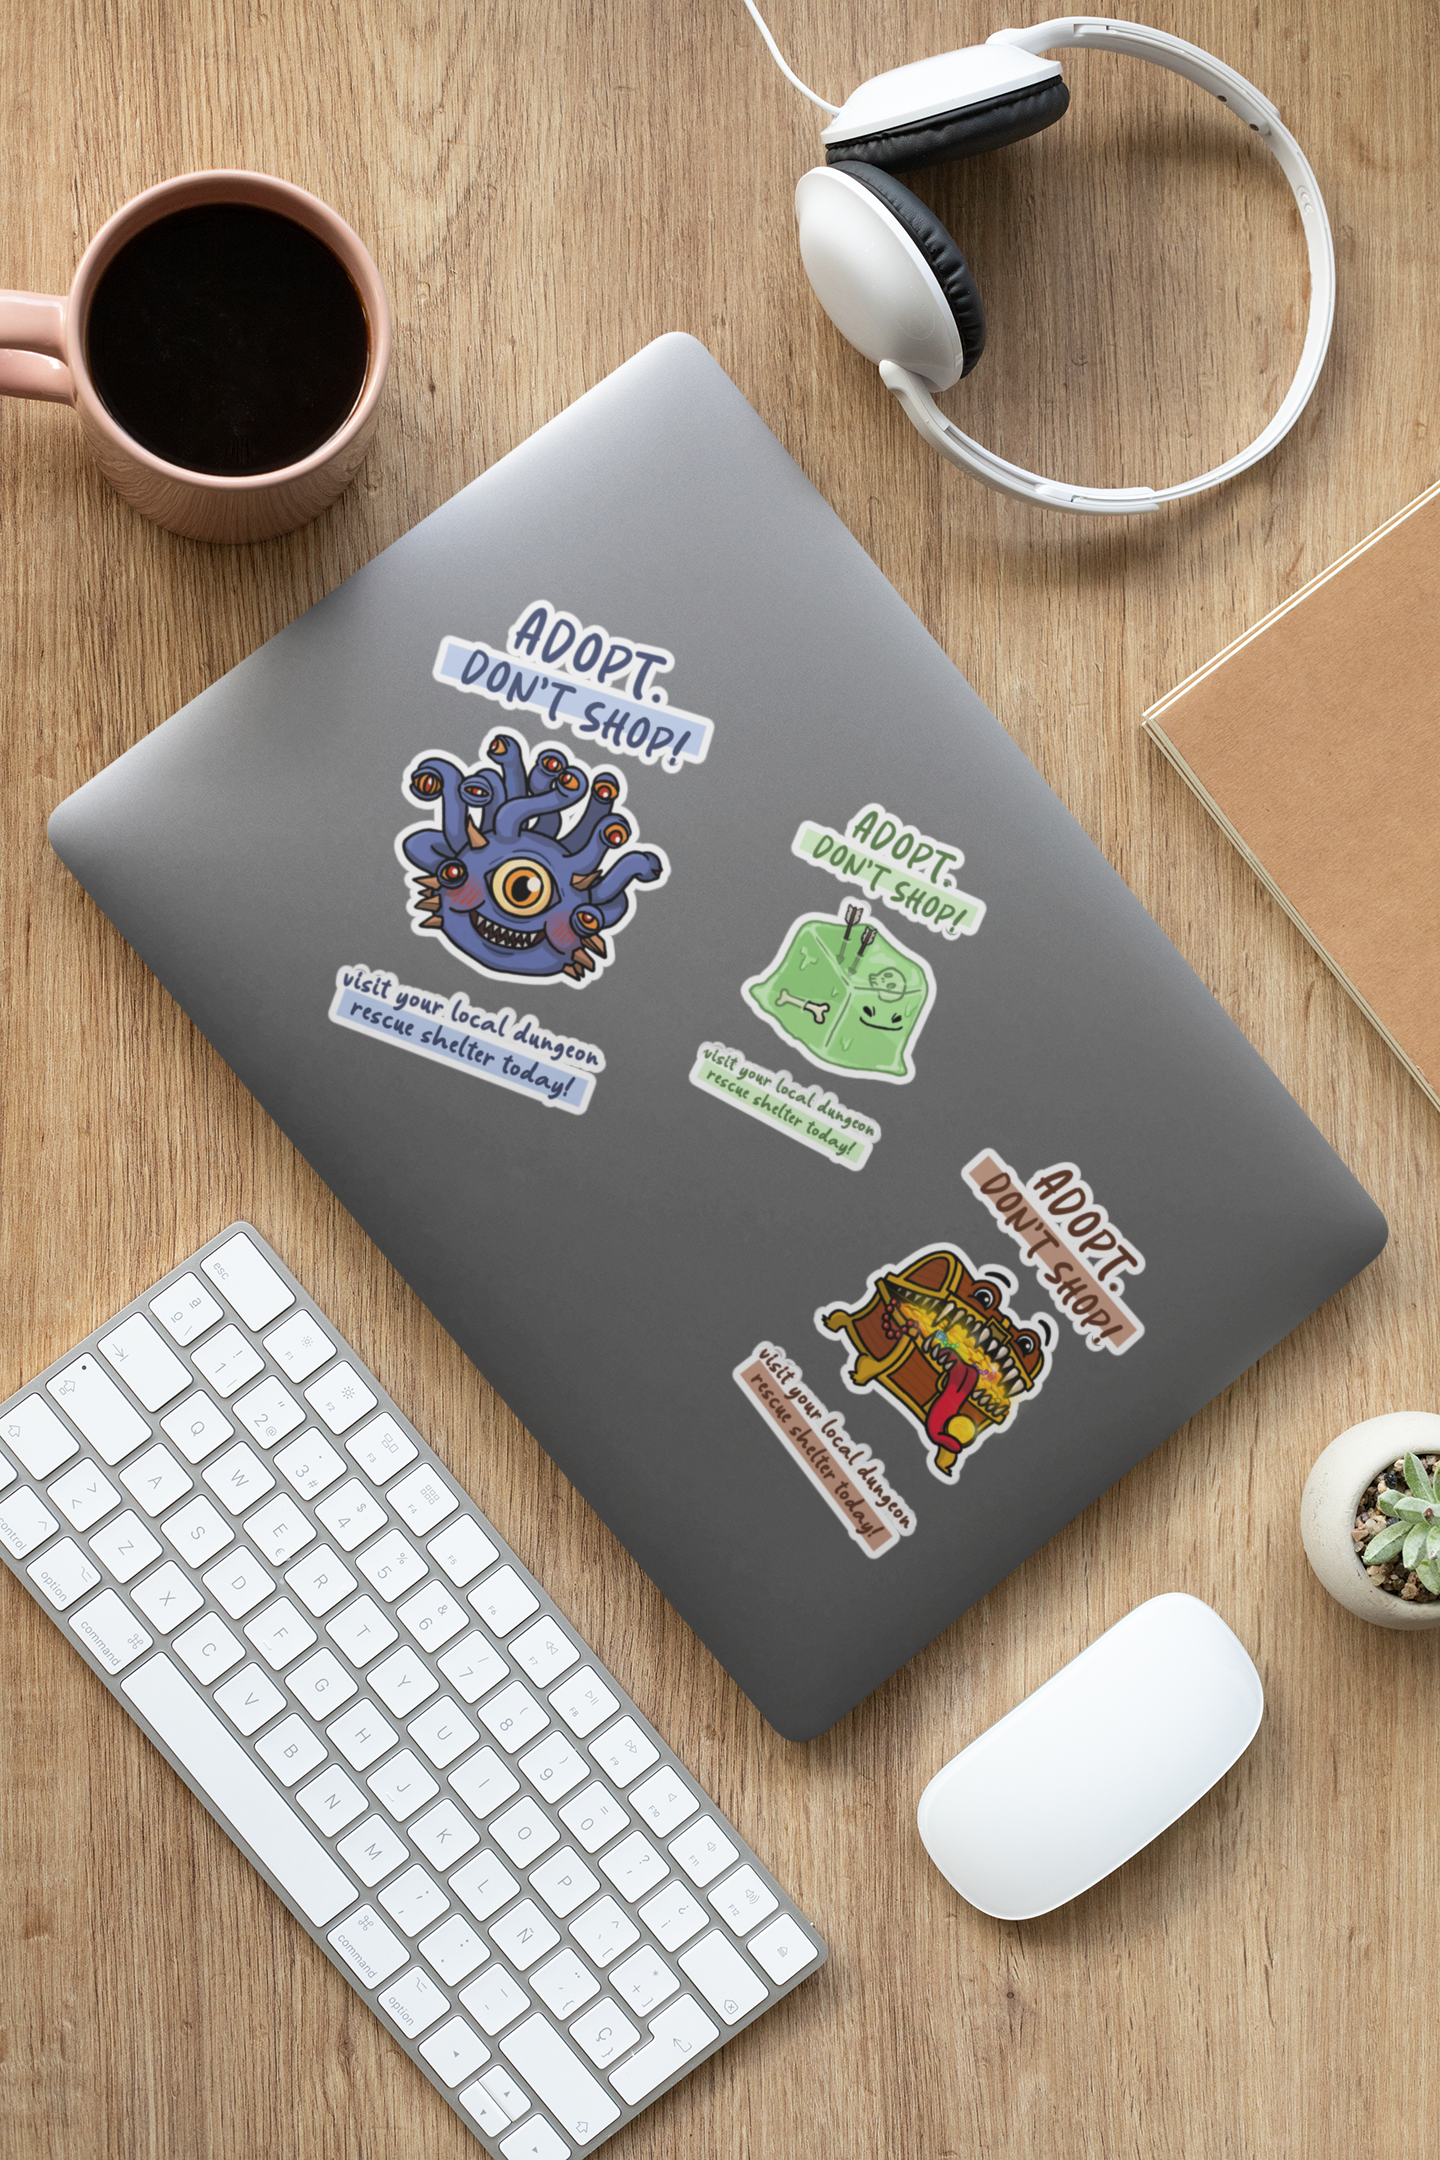 Dungeon Monsters - 9x14 Inch plain Sheet of Peelable, Water Resistant Stickers Pack of 15